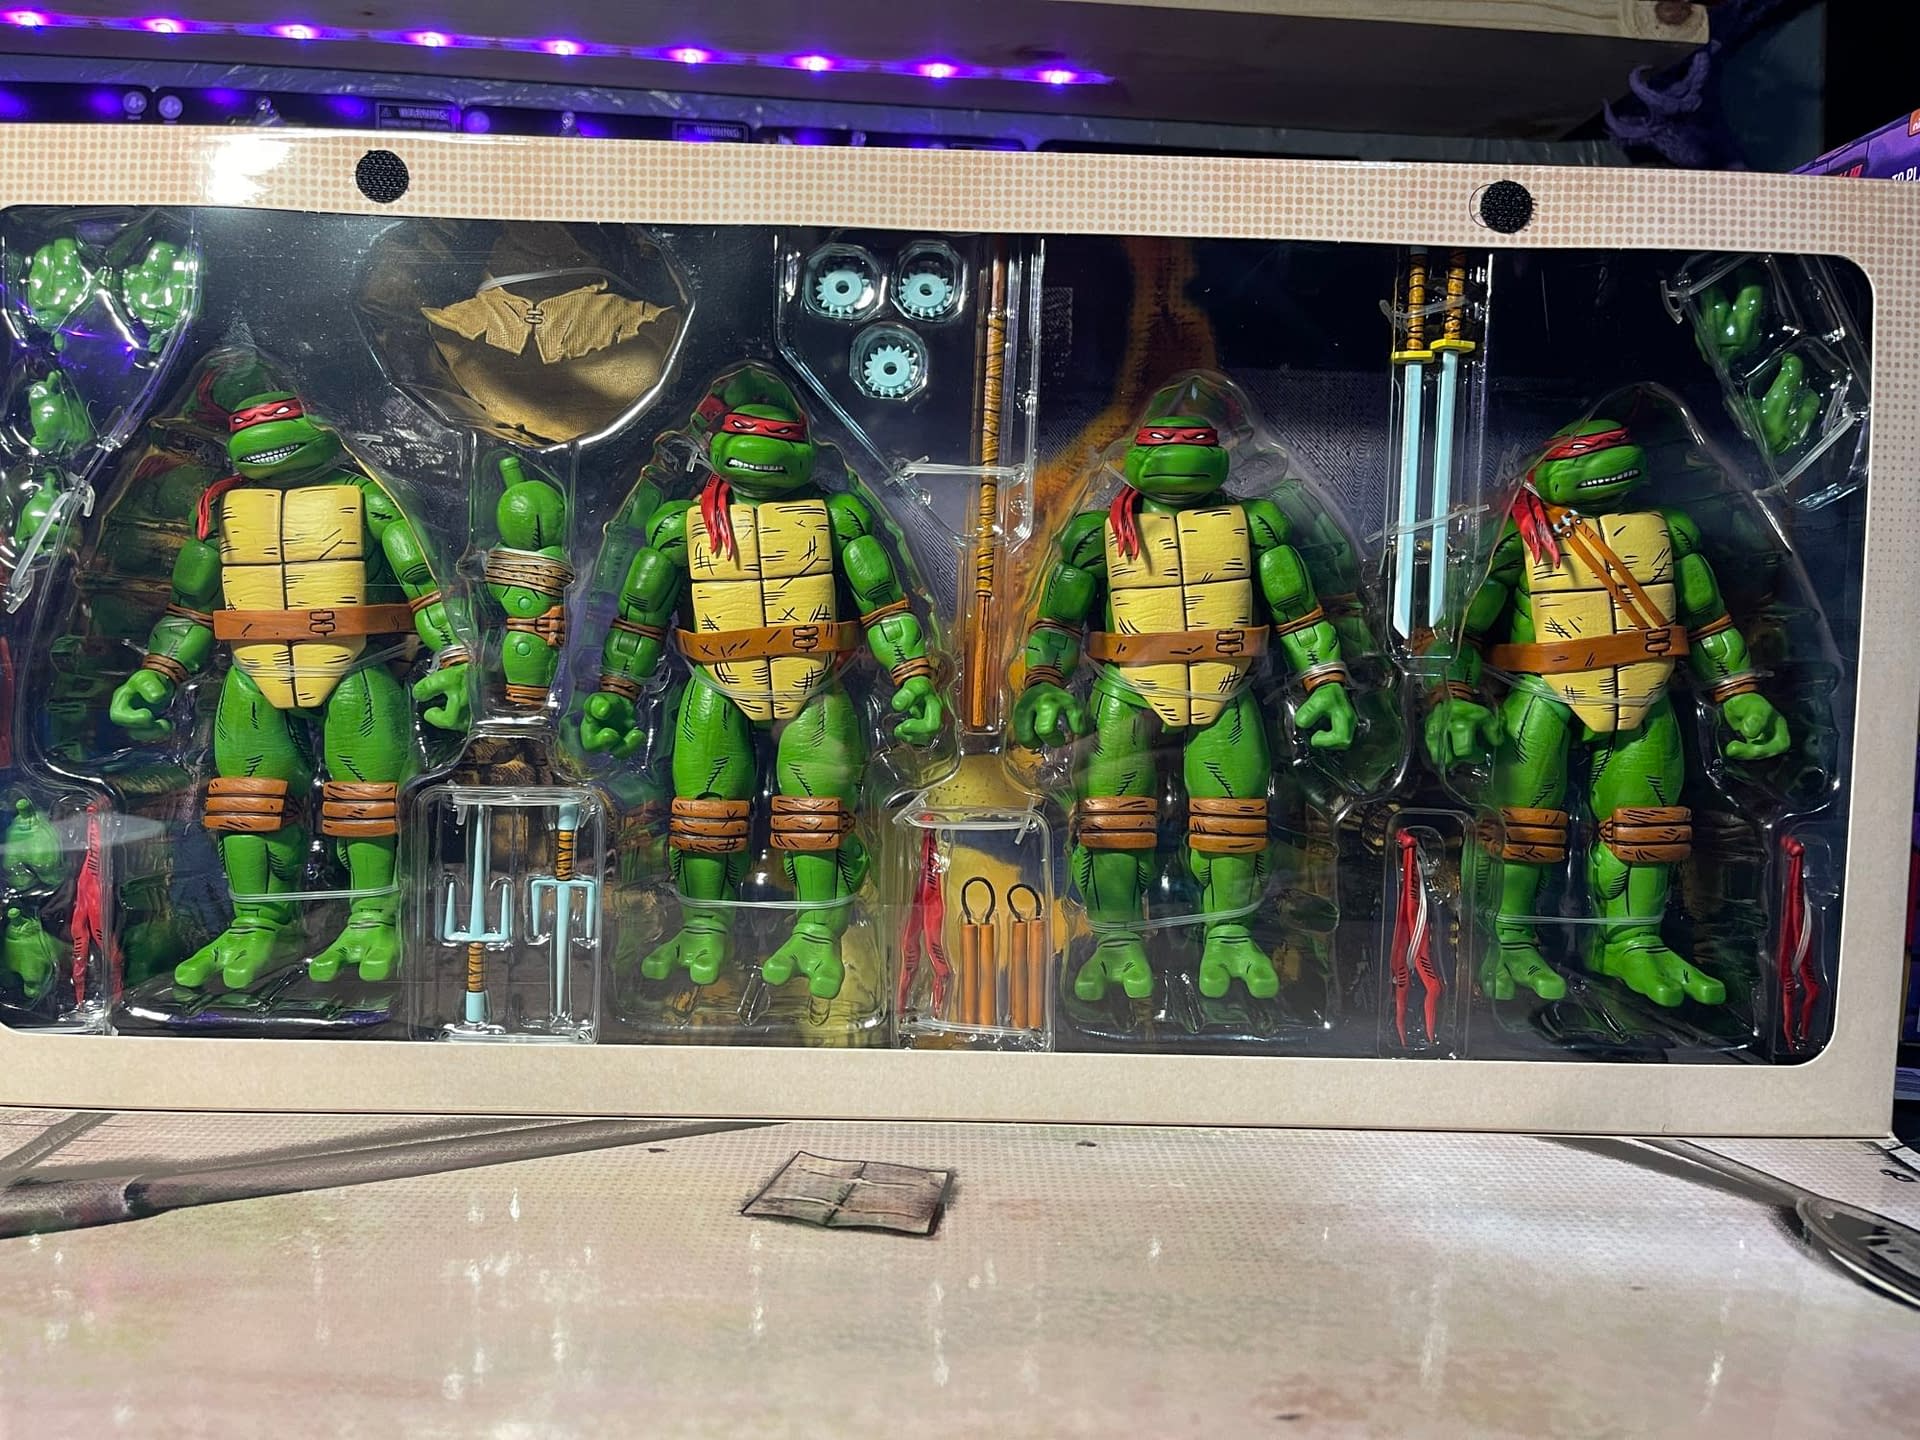 It is The Summer of Turtles with New Cowabunga TMNT Collectibles 